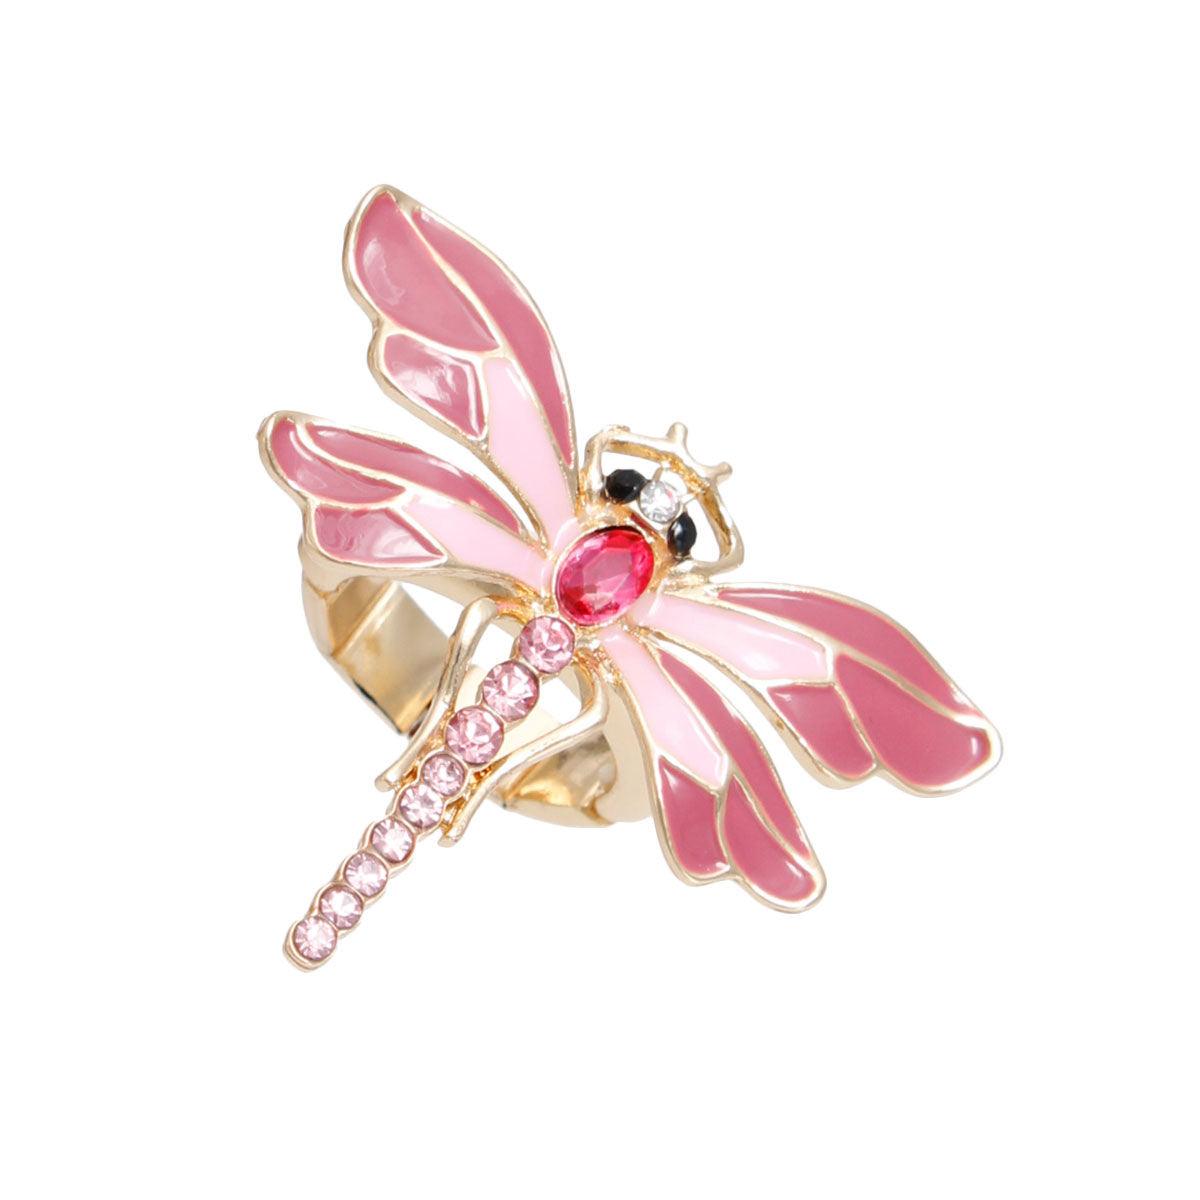 Exquisite Dragonfly Ring: A Delicate Touch of Nature's Beauty